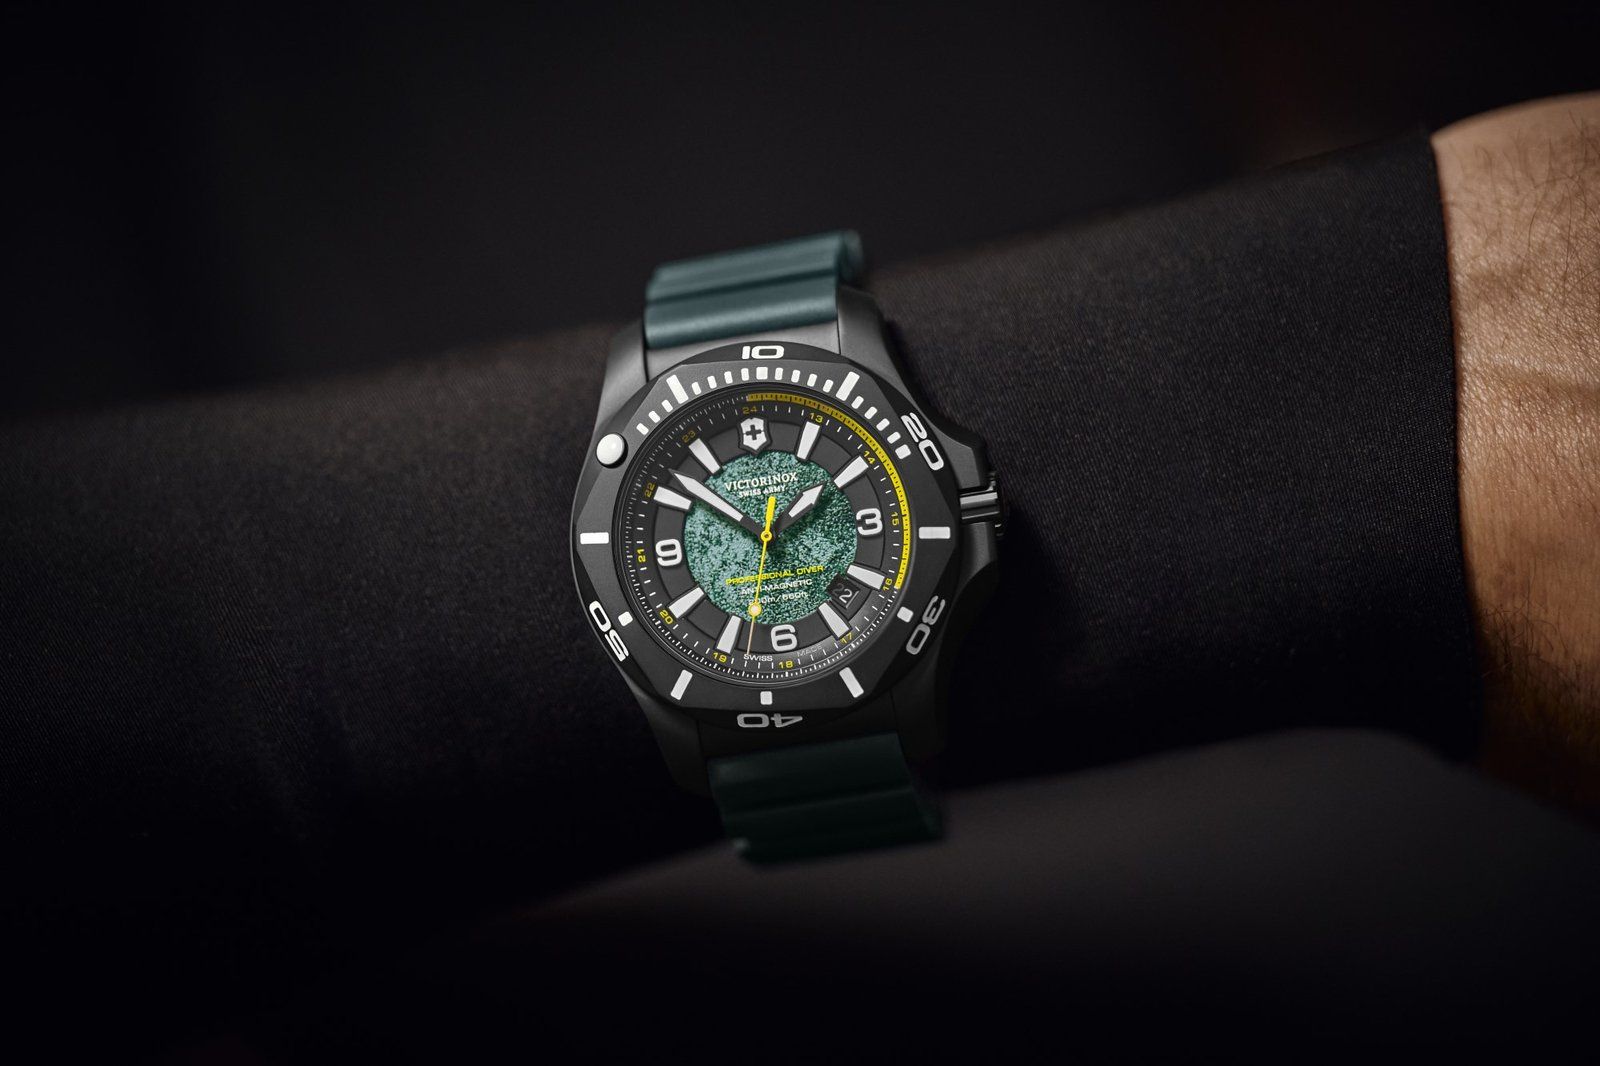 Father’s Day Gifting Guide 2022: What Would You Pair The Watch With?